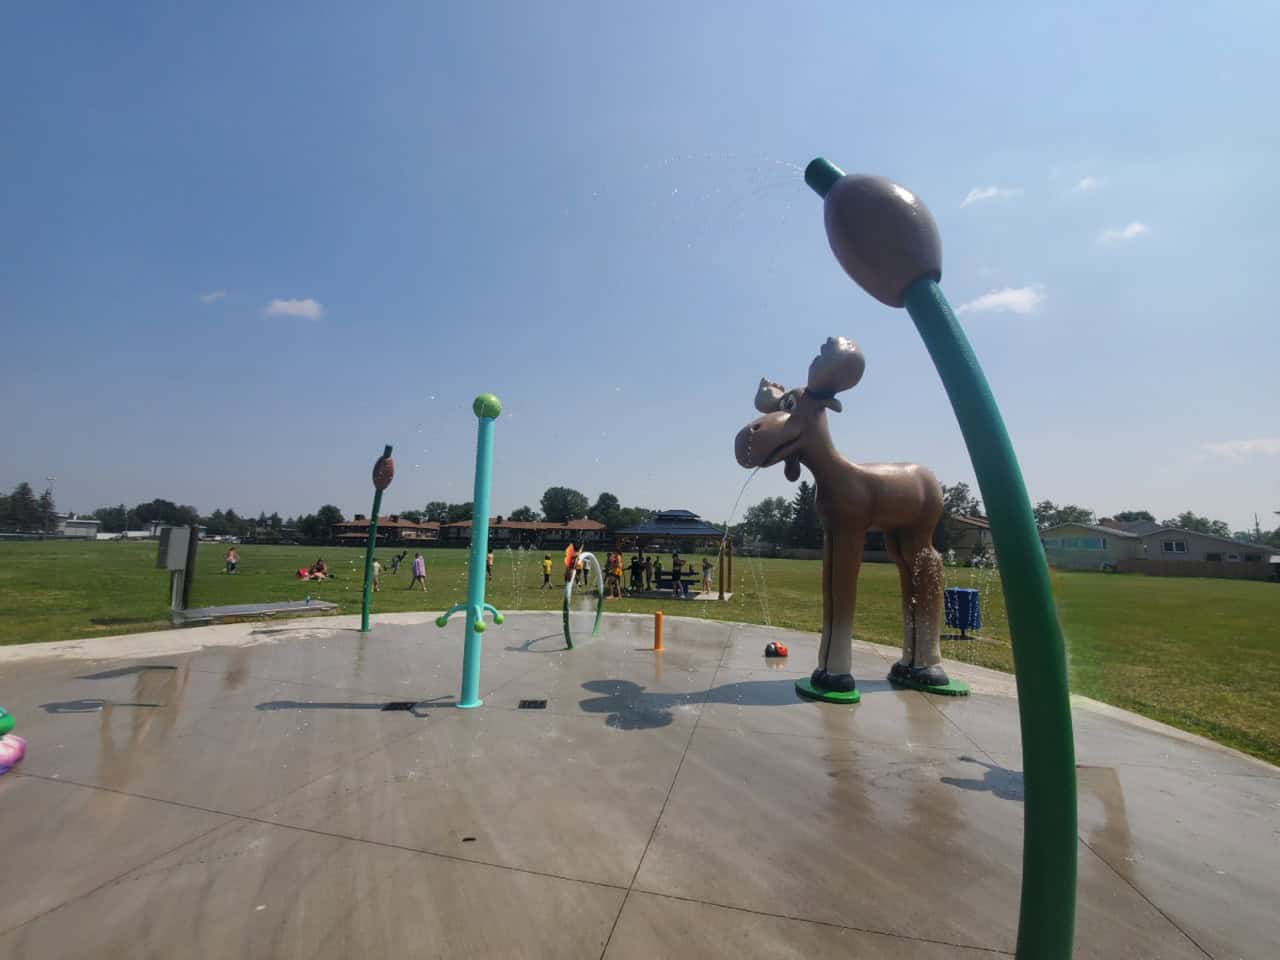 Moose Jaws Newest Spray Park - This new addition in Moose Jaw is a welcome opportunity for kids to cool off from the hot prairie summer heat